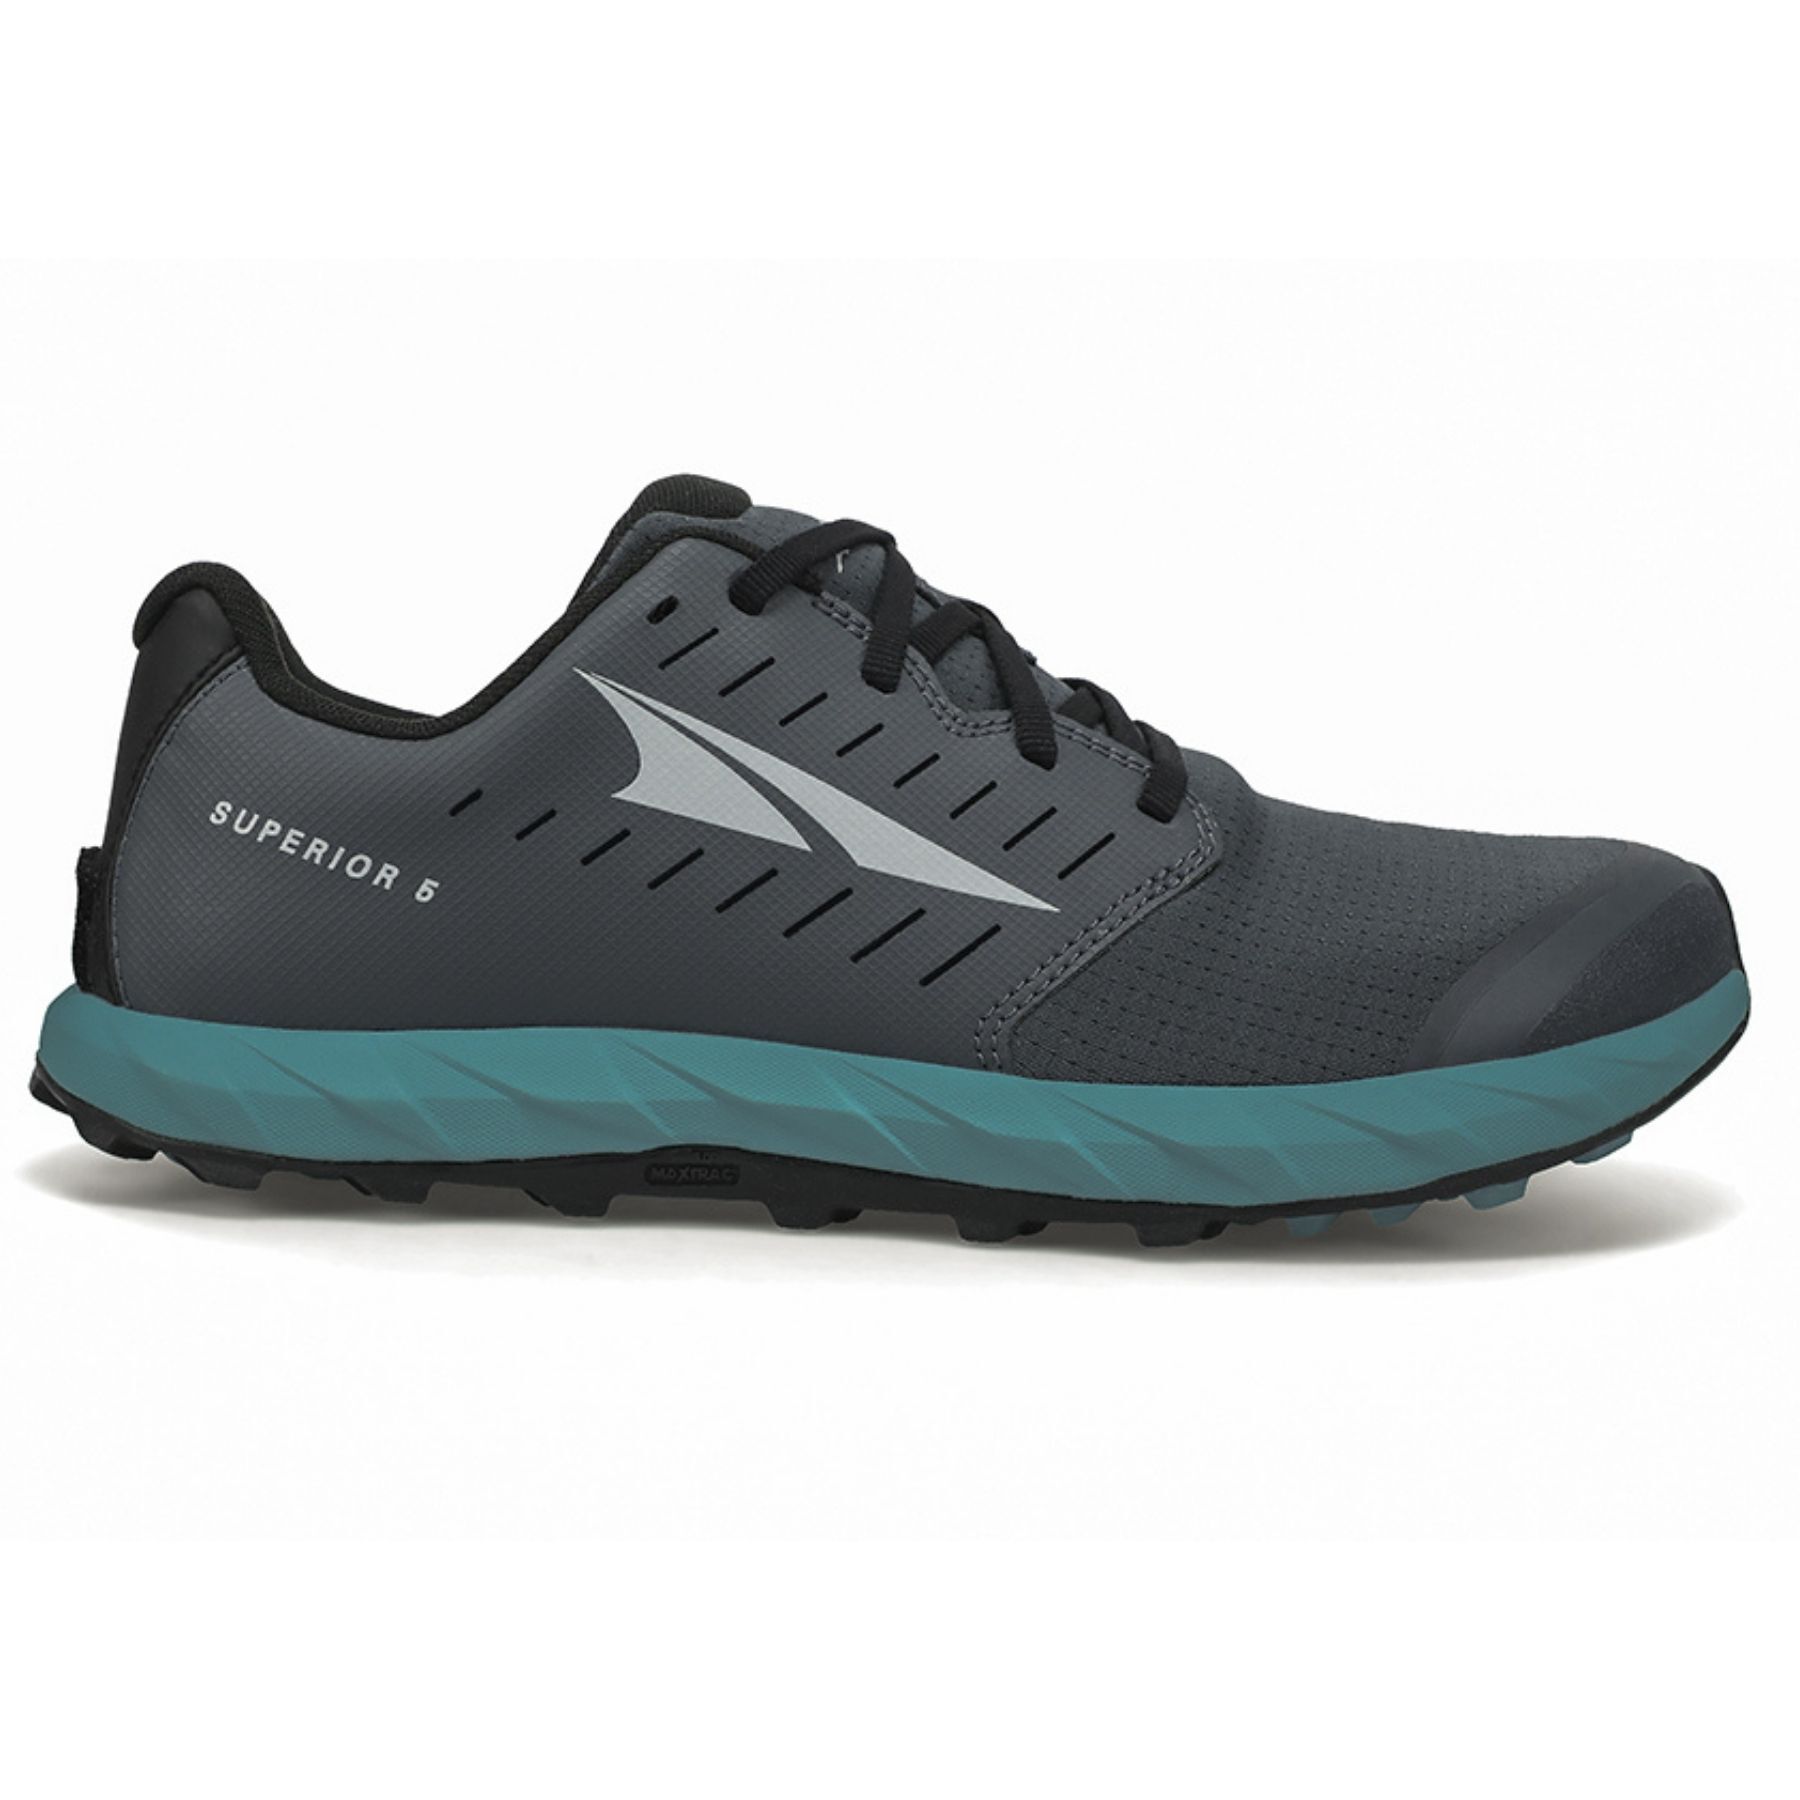 Altra Superior 5 - Trail running shoes - Women's